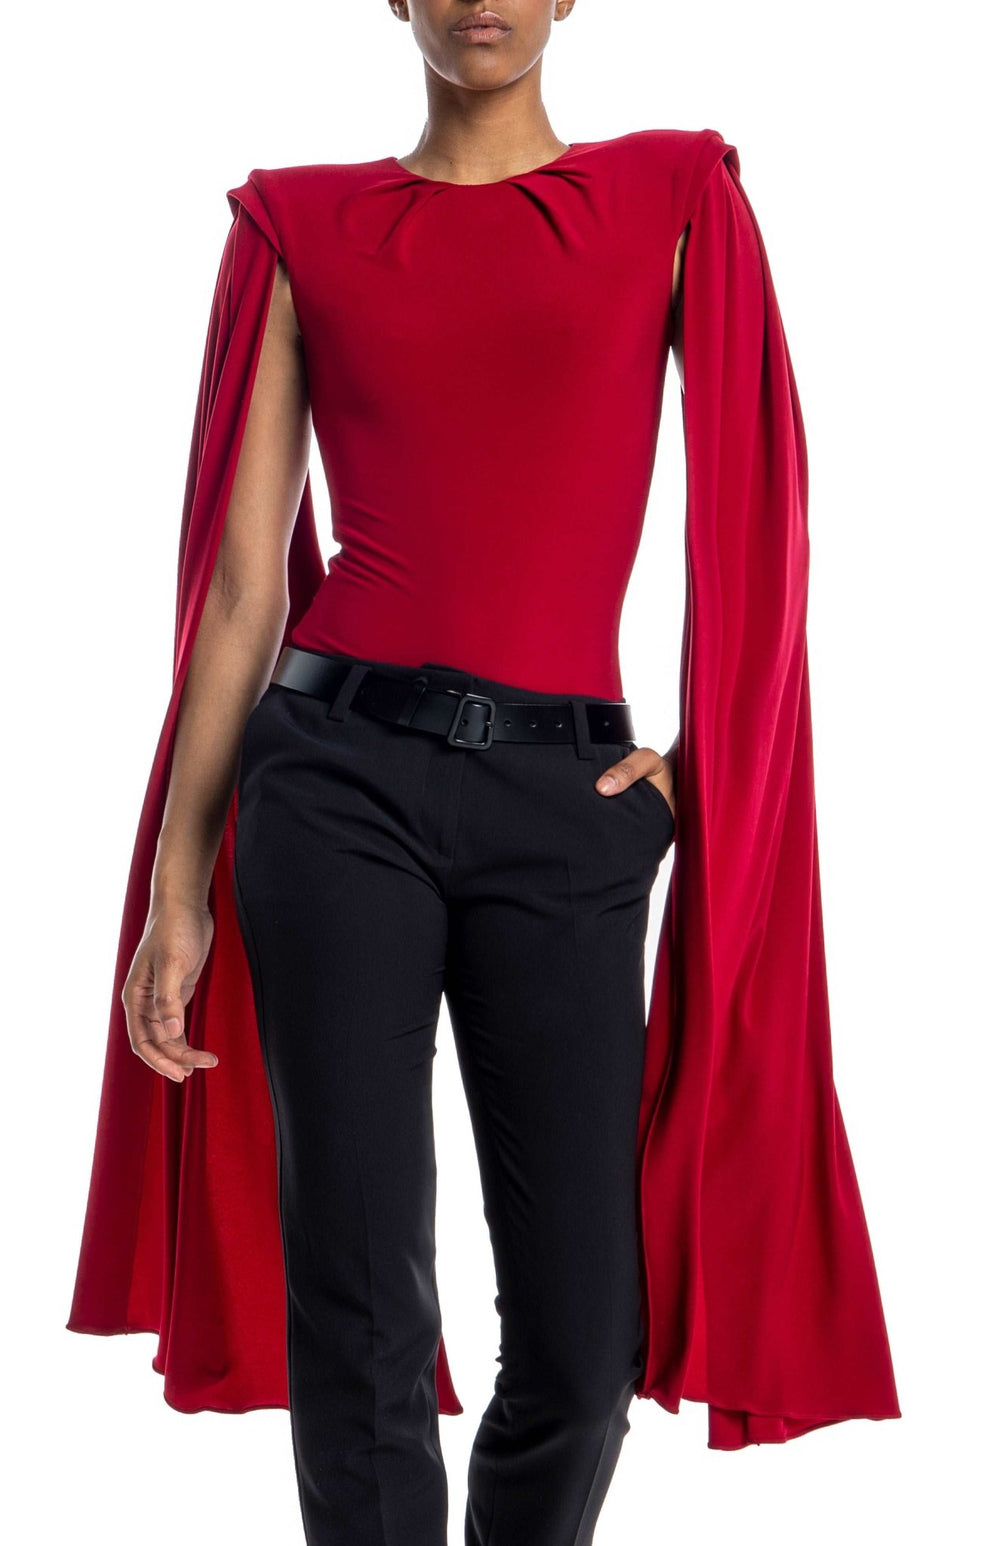 dramatic, red draped bodysuit with shoulder pads and oversized cape sleeves